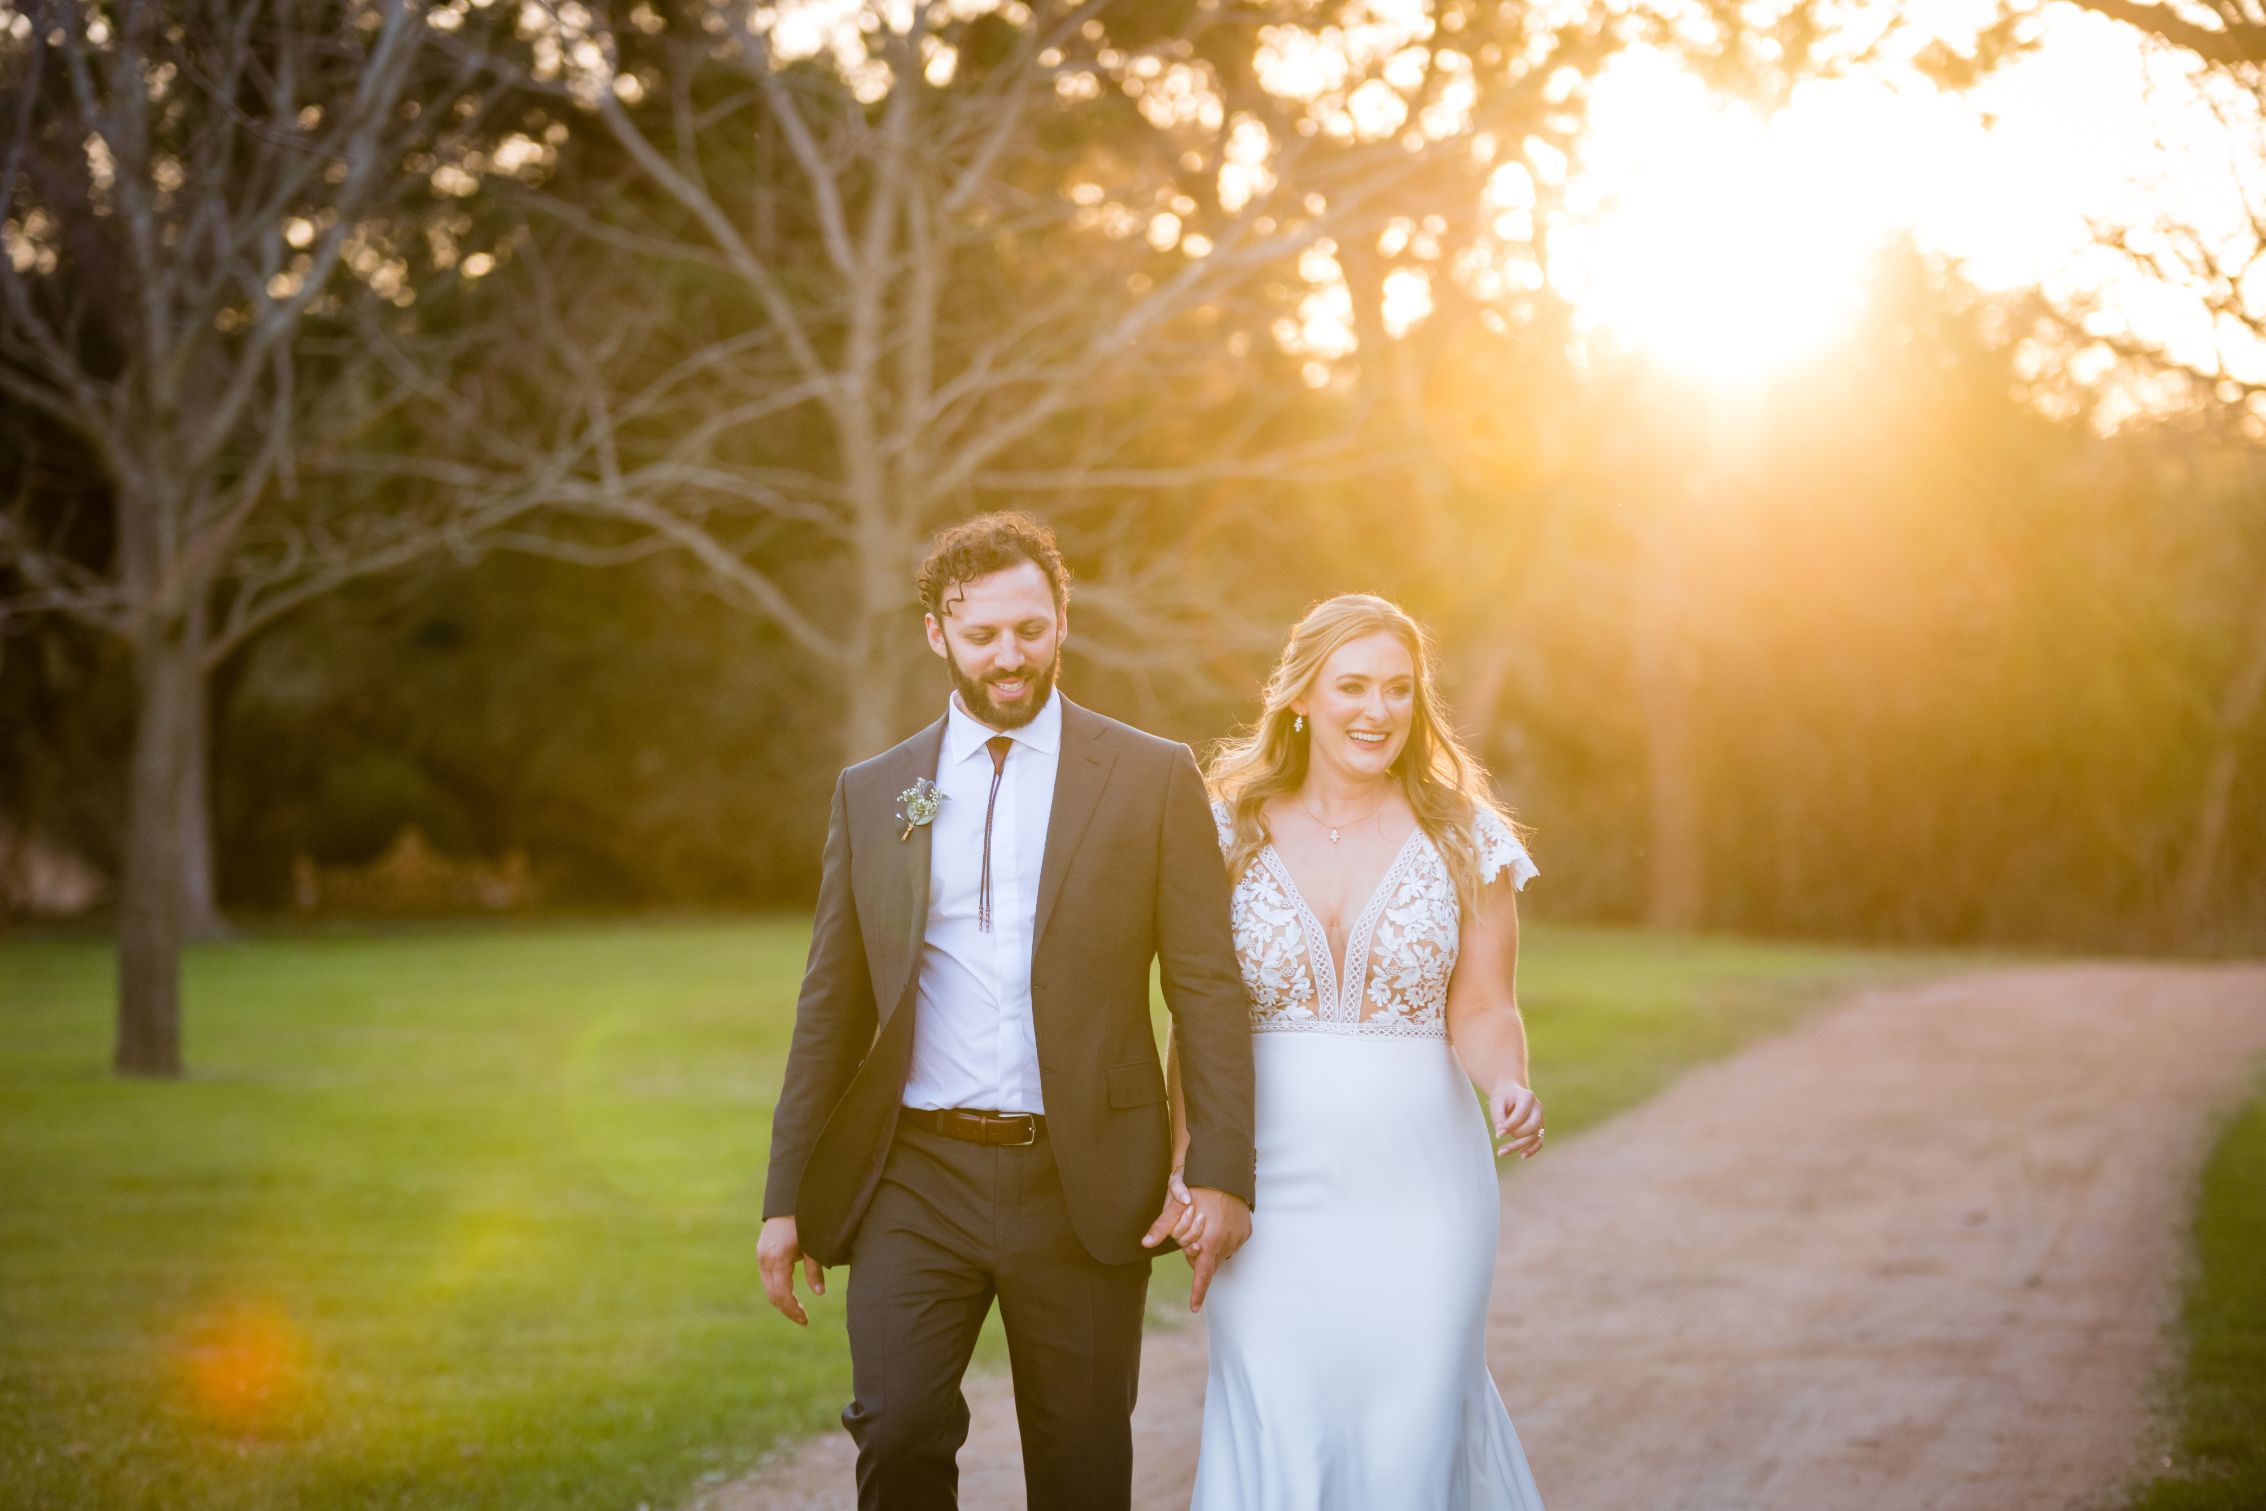 Bride and groom hold hands walking down dirt path with trees and a large warm sunset in the background.